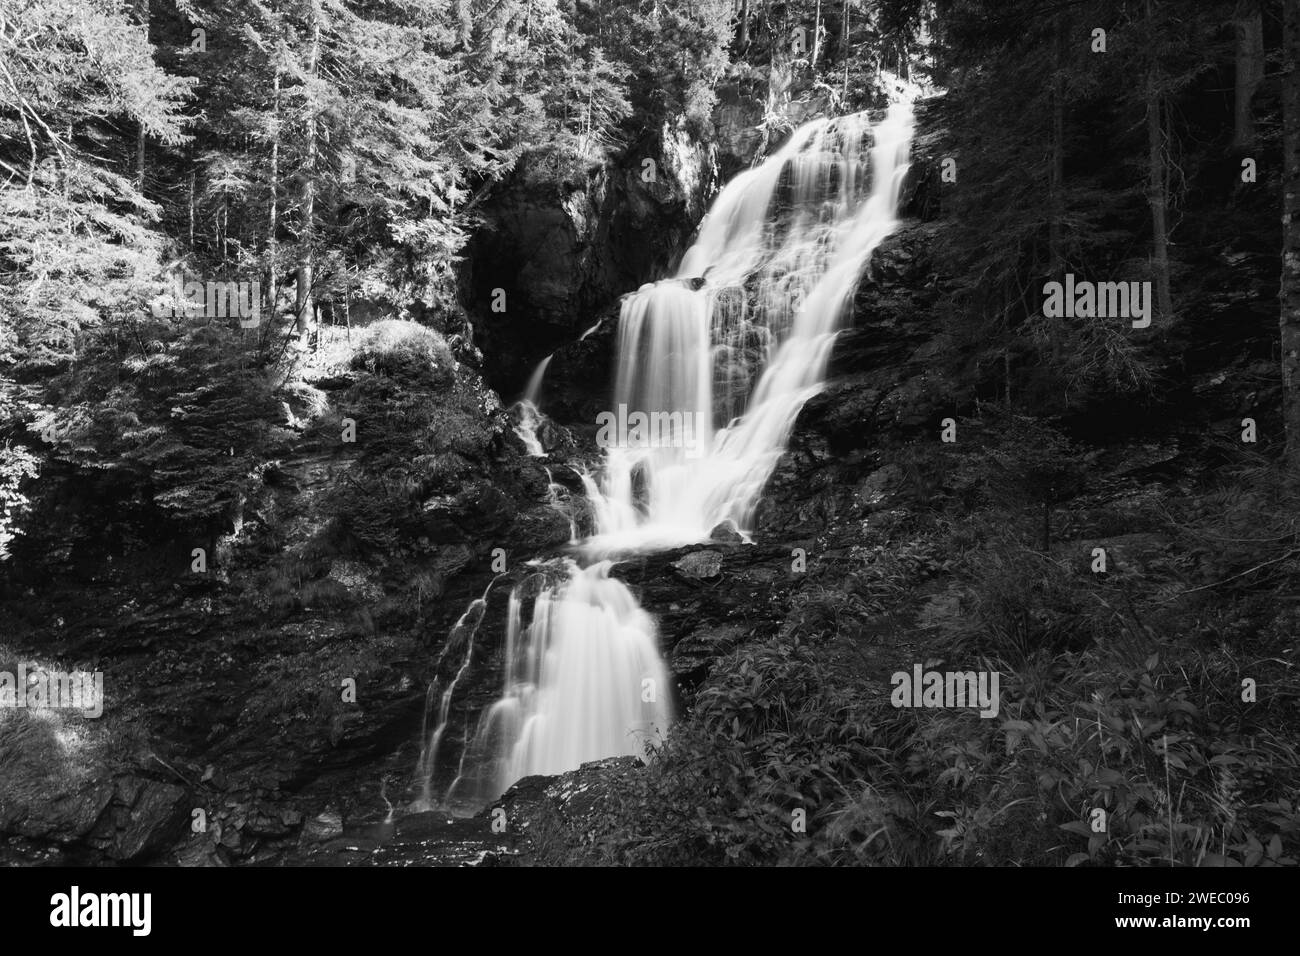 Riesach waterfall in Untertal Valley, Rohrmoos-Untertal in Schladminger Alps, Austria. Black and white photography. Stock Photo